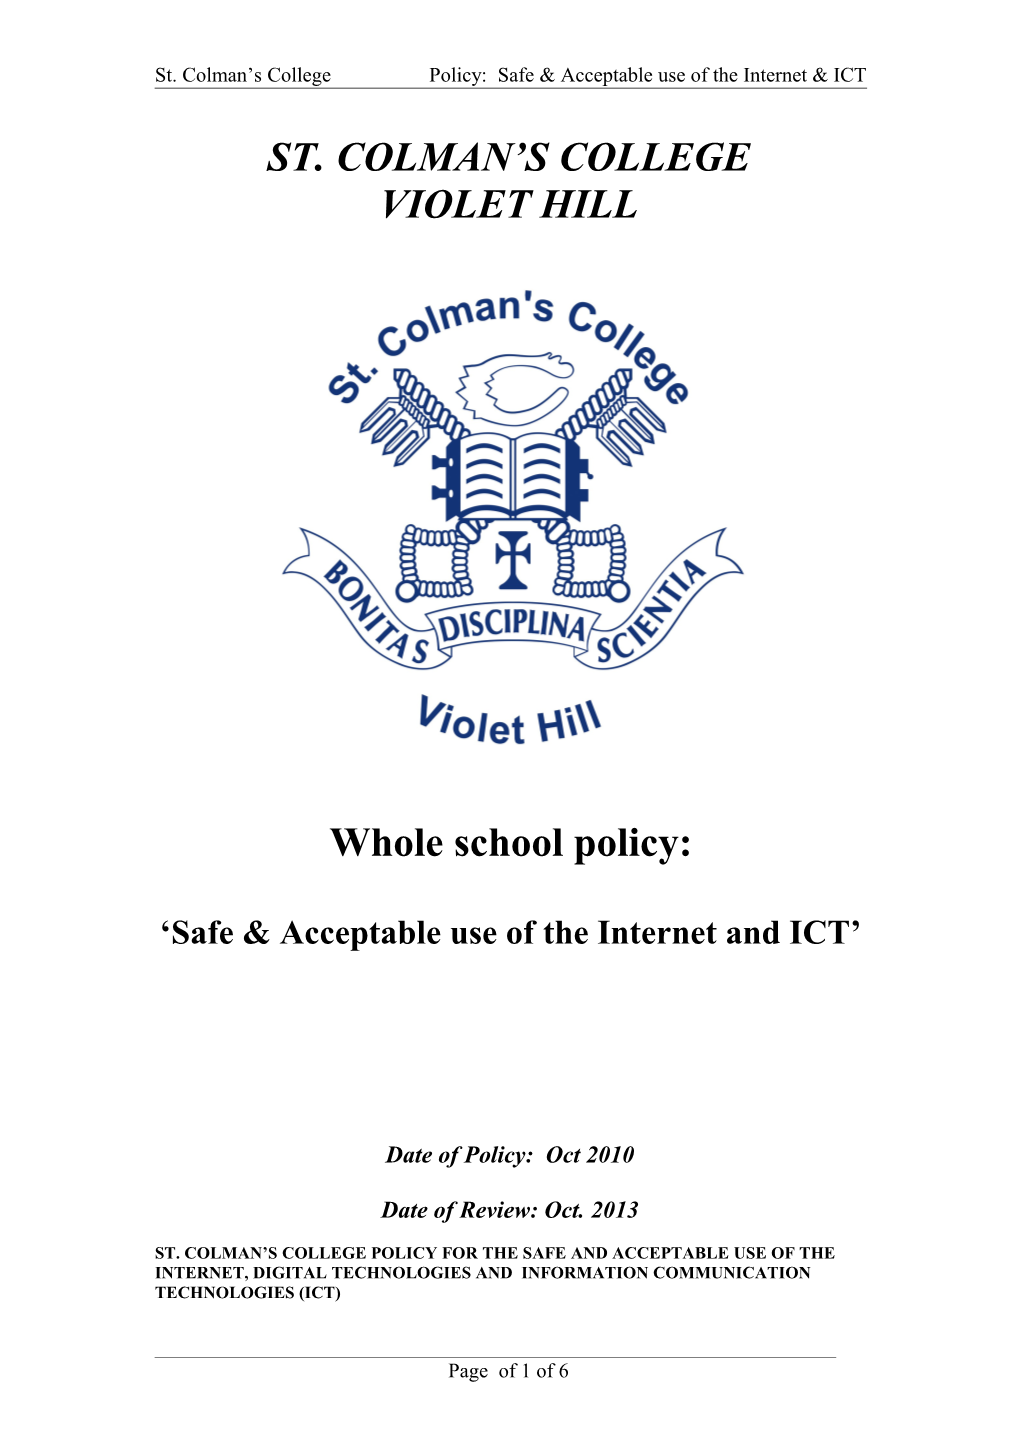 St. Colman S College Policy: Safe & Acceptable Use of the Internet & ICT